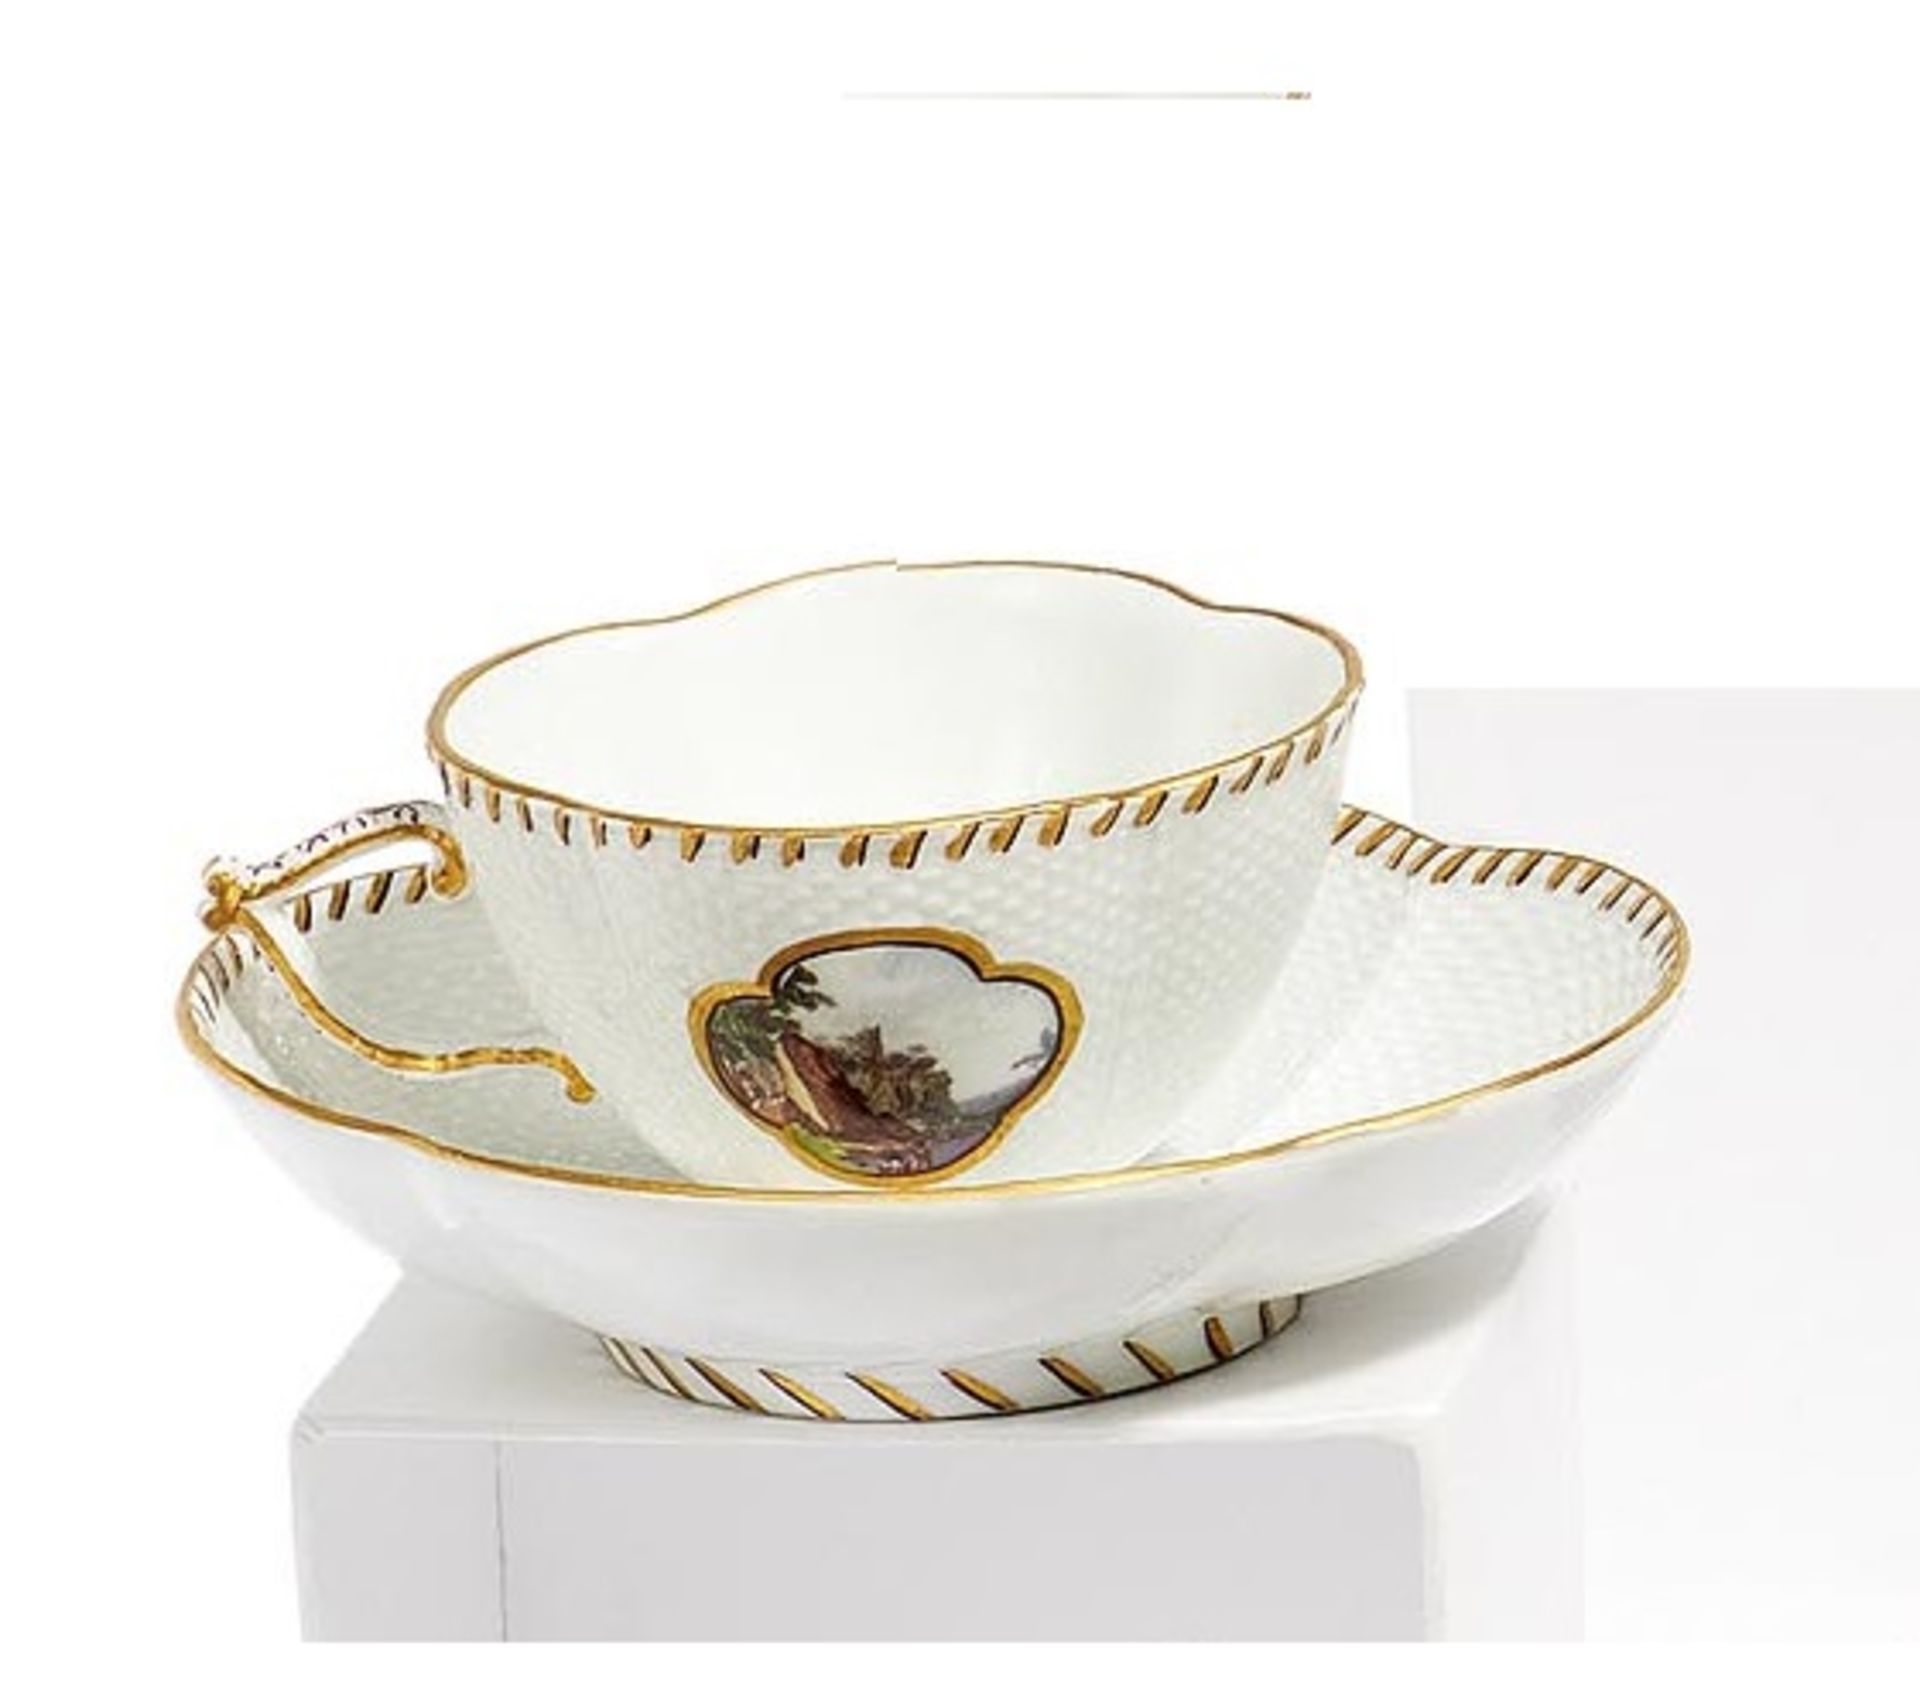 Meissen: PORCELAIN CUP AND SAUCER WITH LANDSCAPE CARTOUCHES AND BASKET WEAVE RELIEF - Image 7 of 7